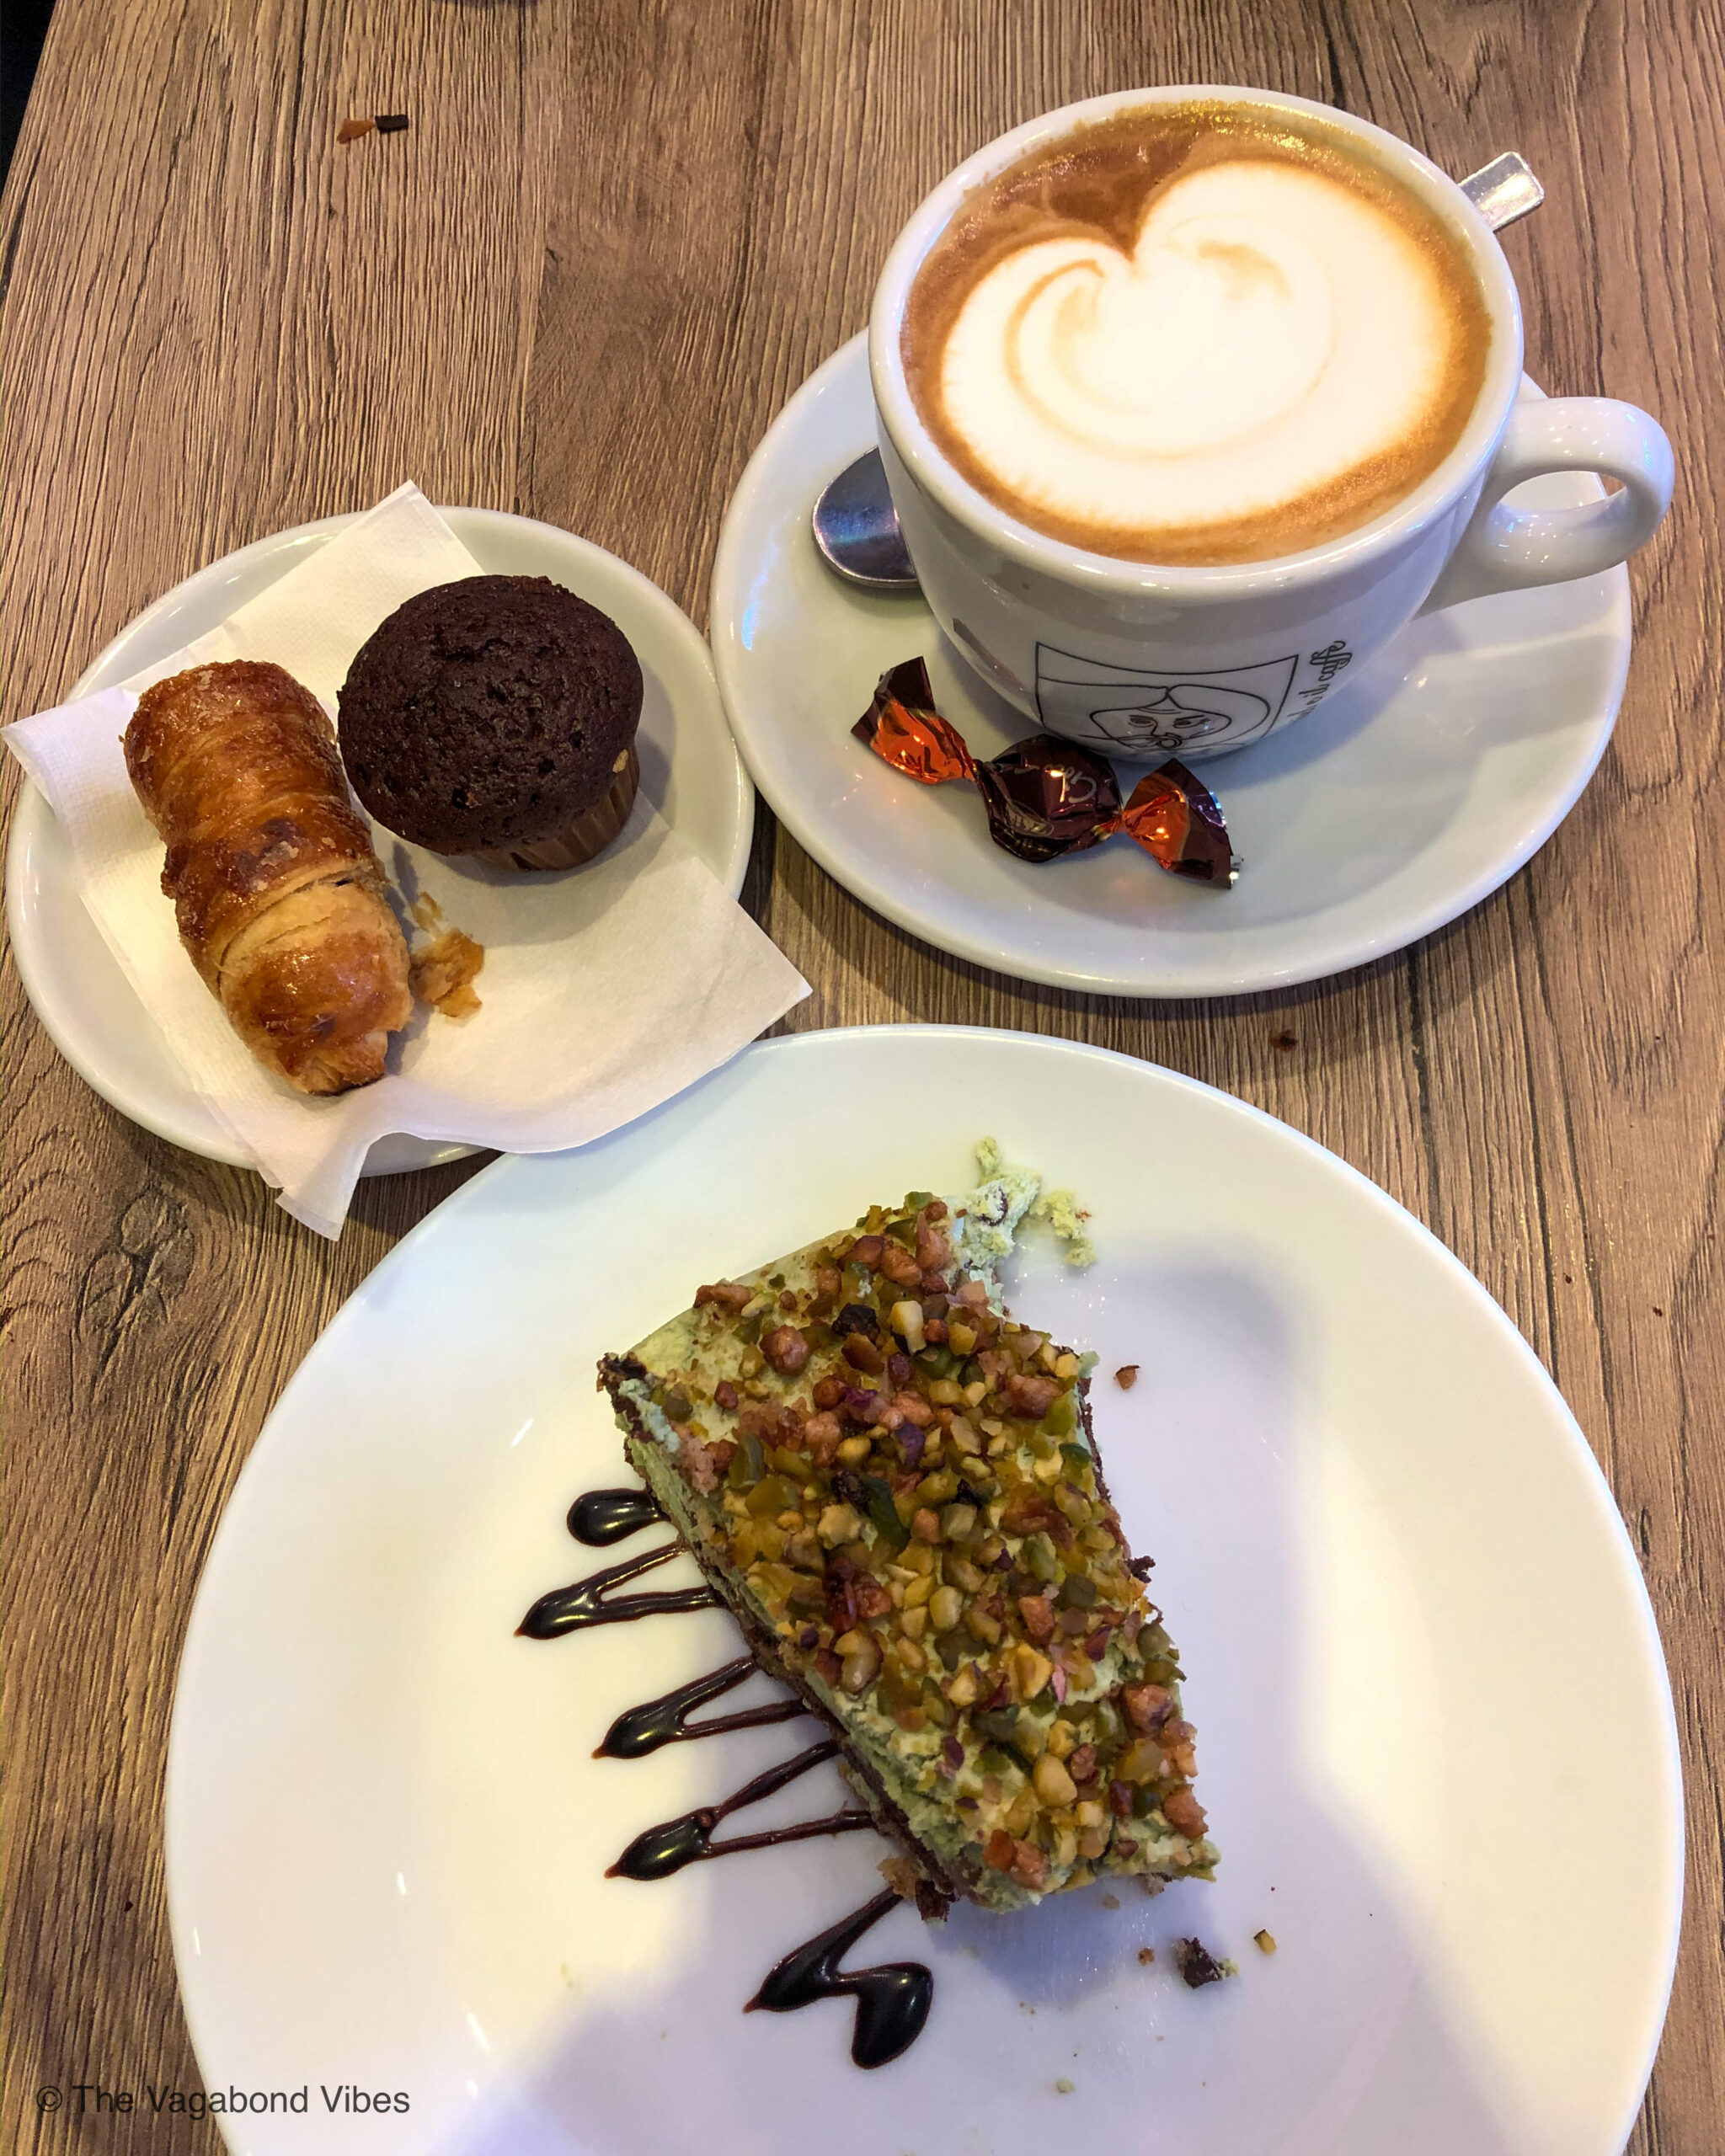 Cafe in Milano, Italy, Coffee, Pista Pastry